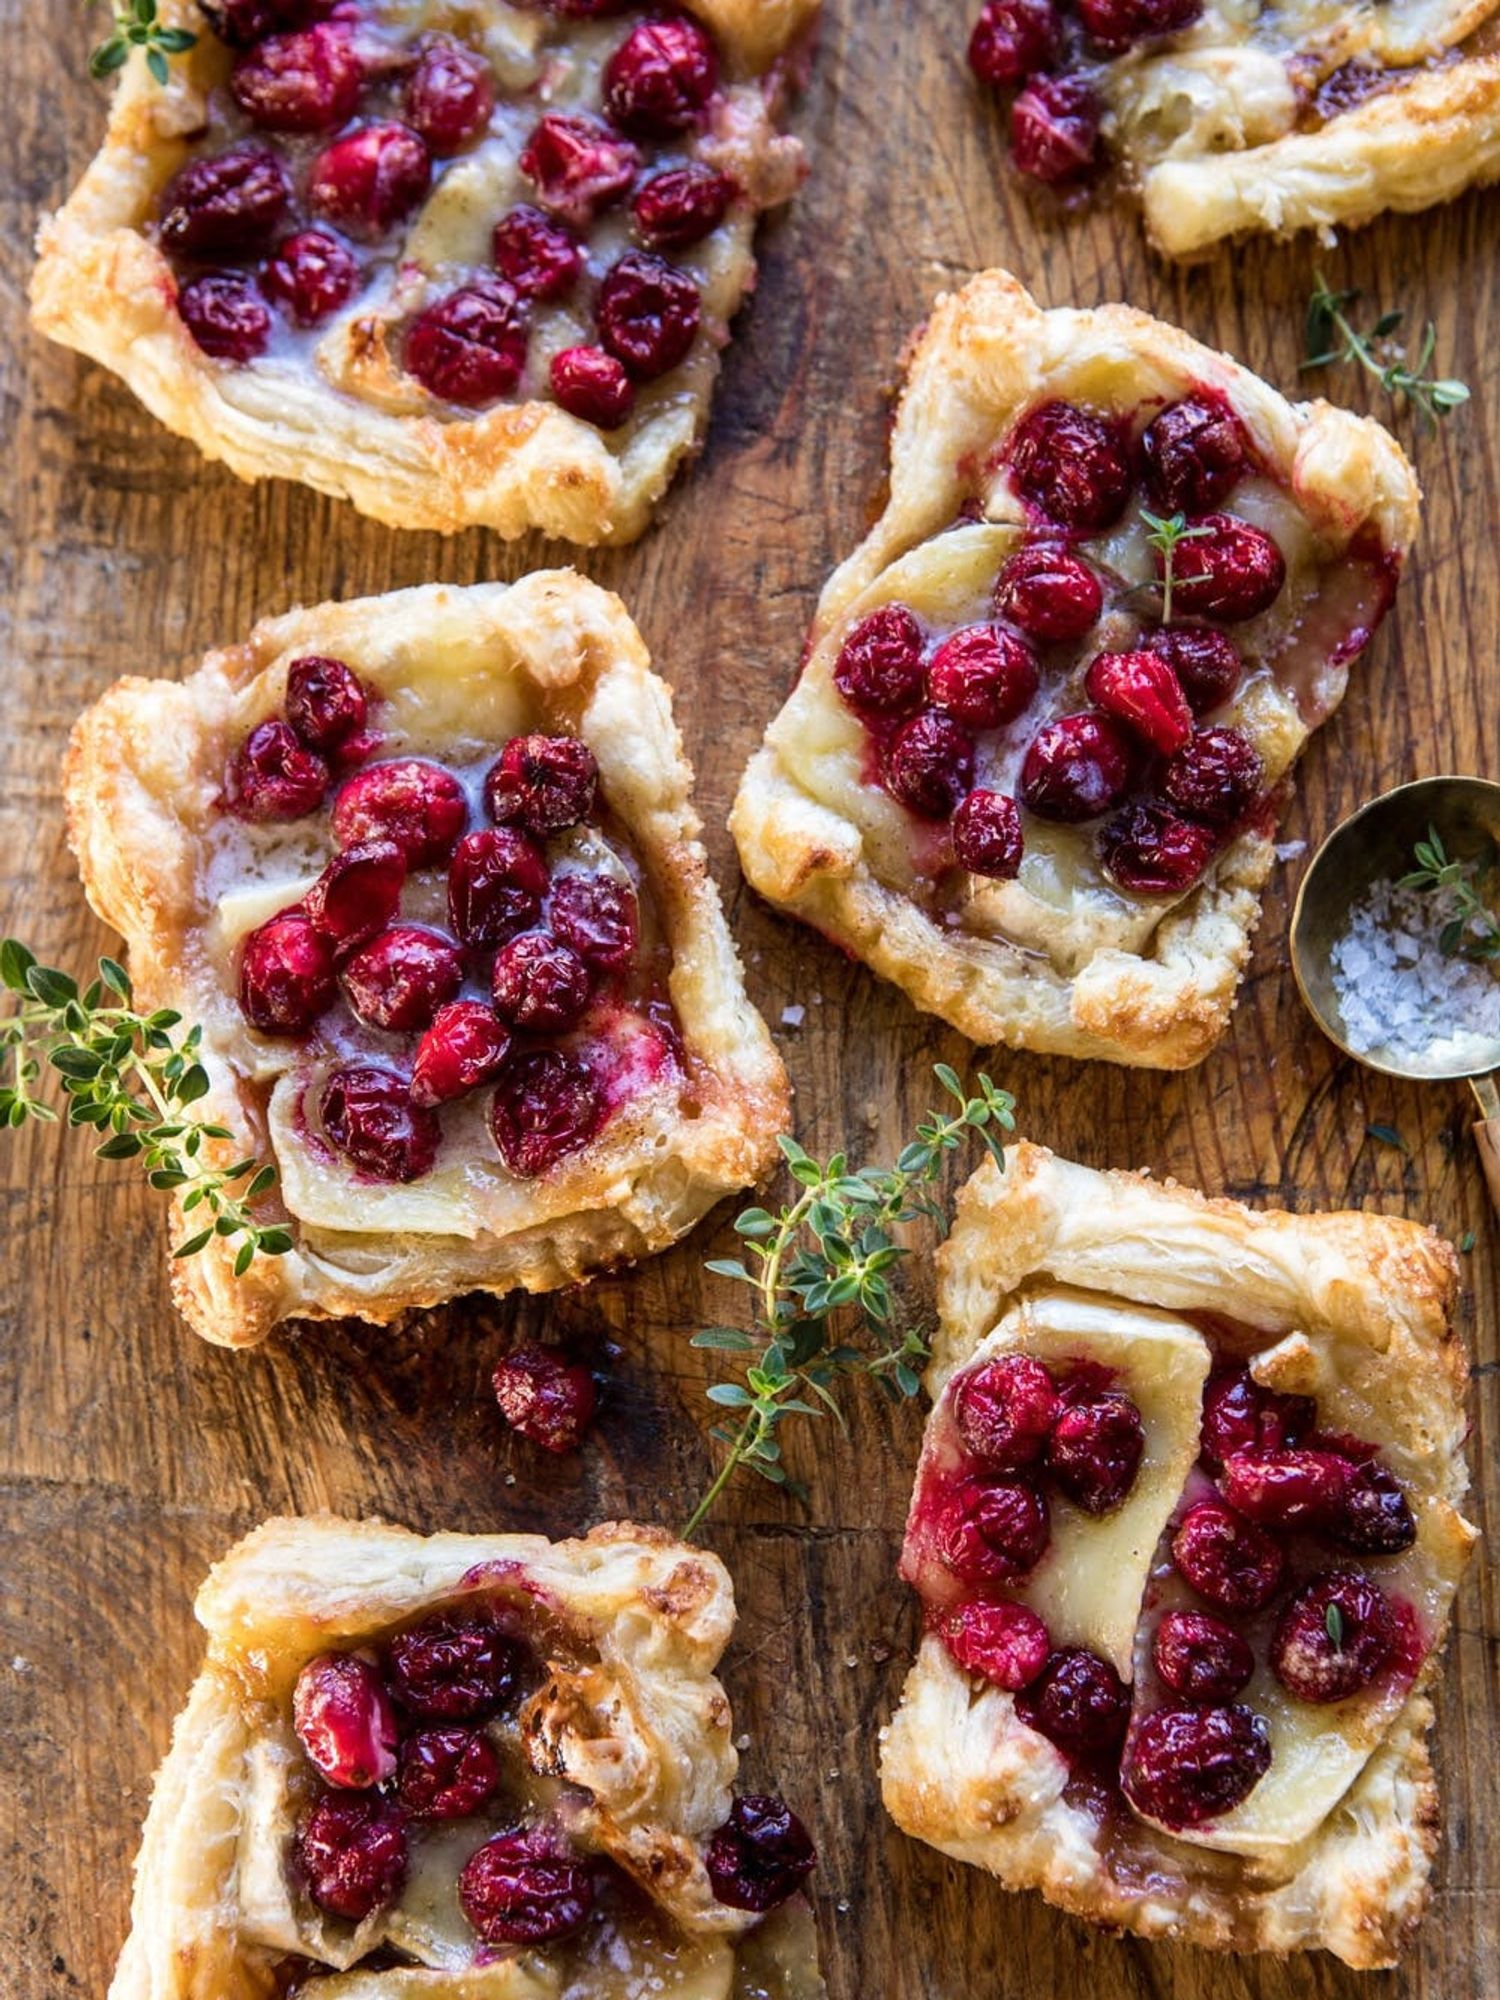 Baked Cranberry Brie Pastry Tarts on a wooden table